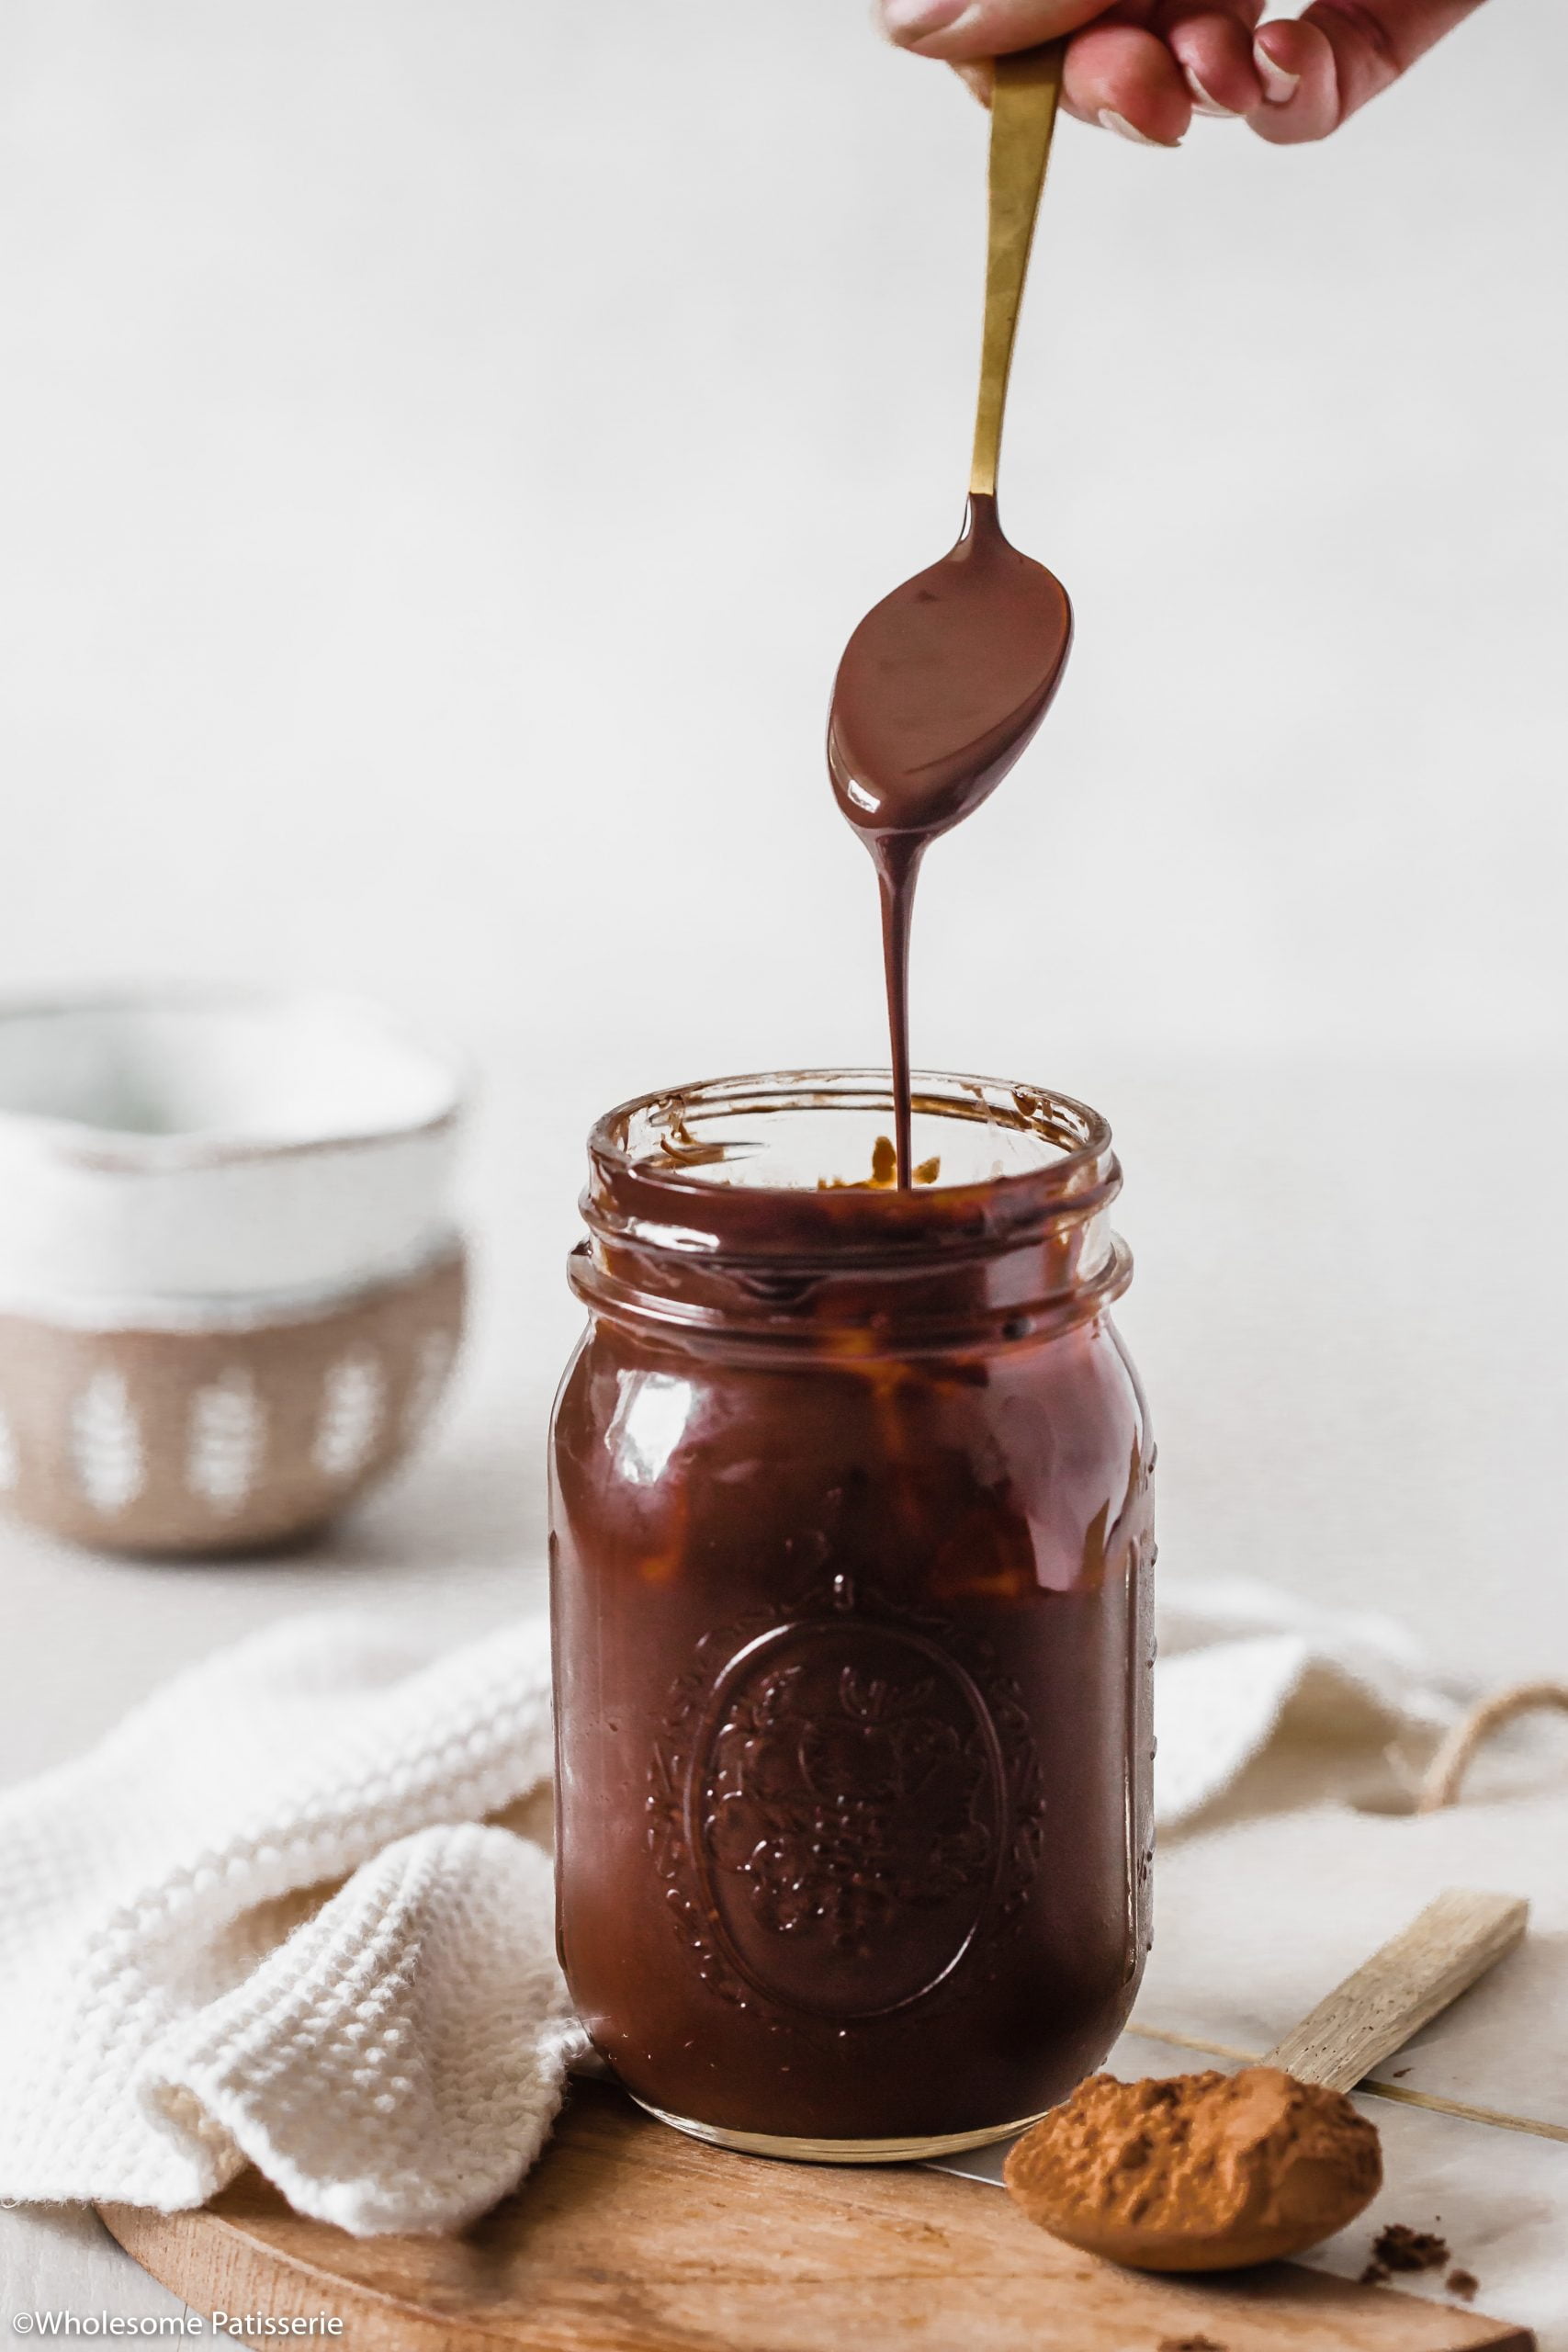 Showing the consistency of the finished chocolate sauce